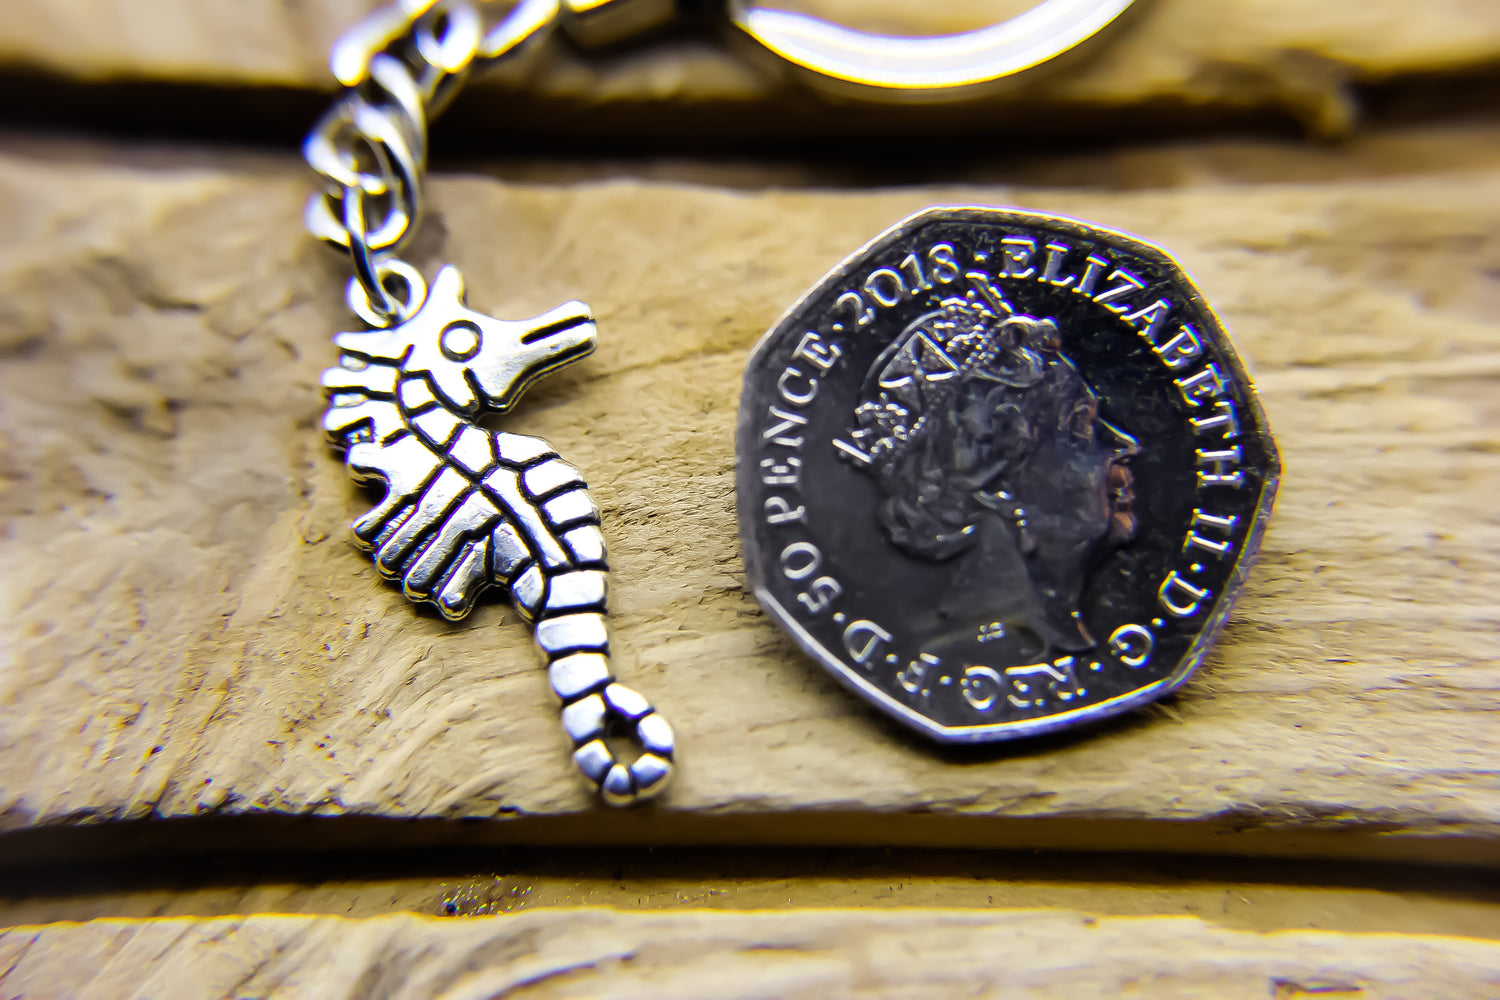 Silver seahorse pendant next to Fifty pence piece